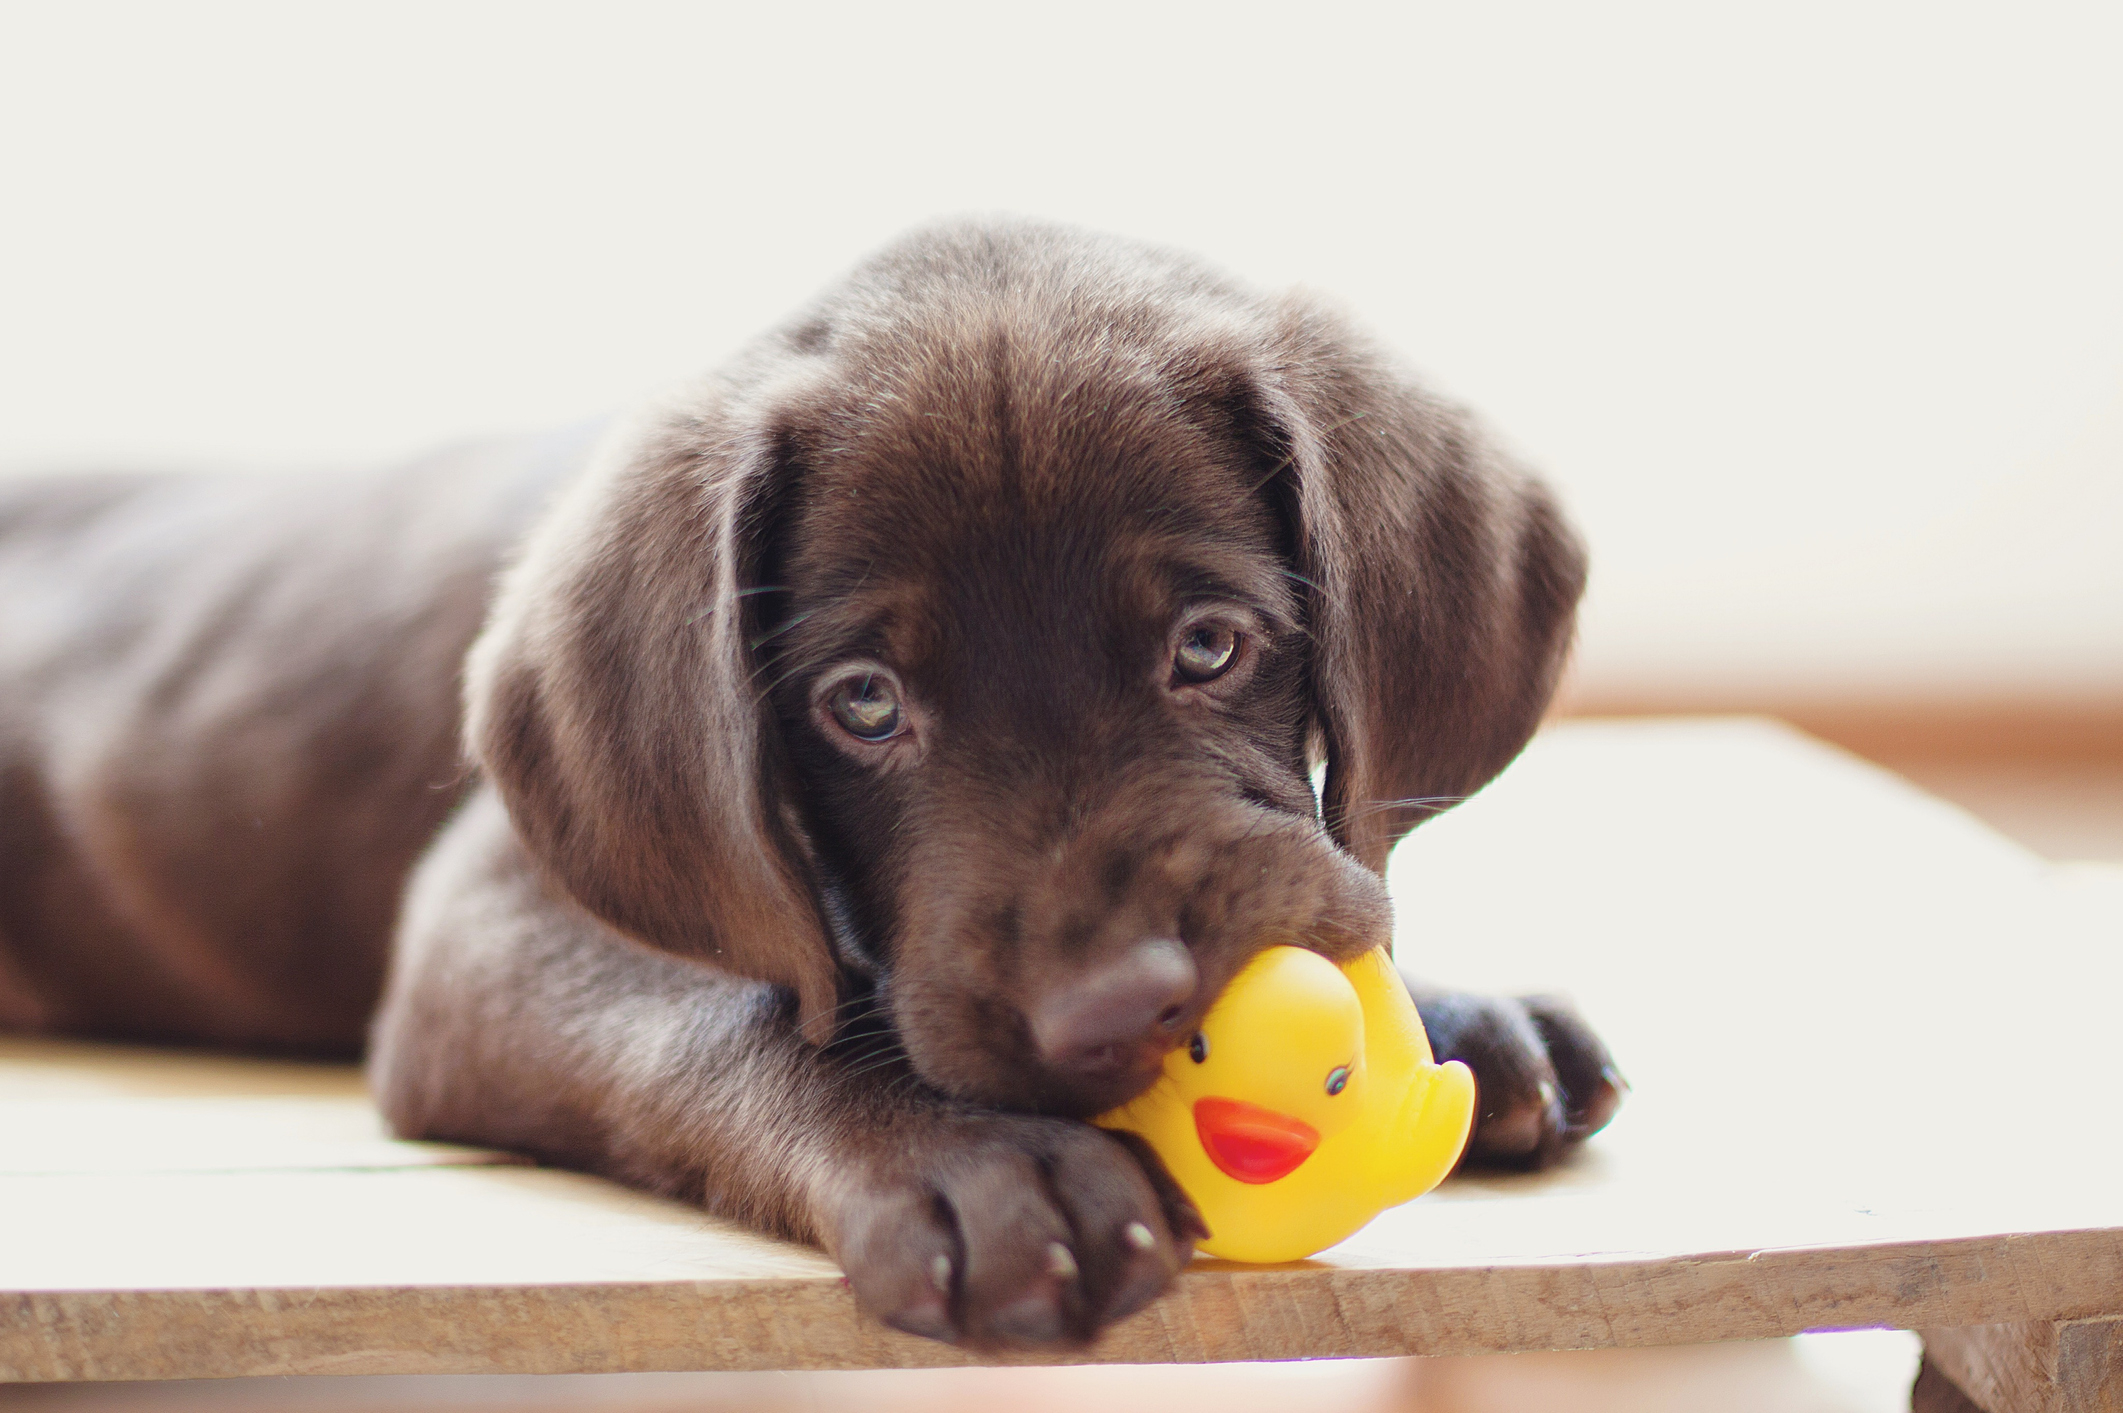 Brown puppy lies on floor biting a yellow rubber duck, looking at the camera